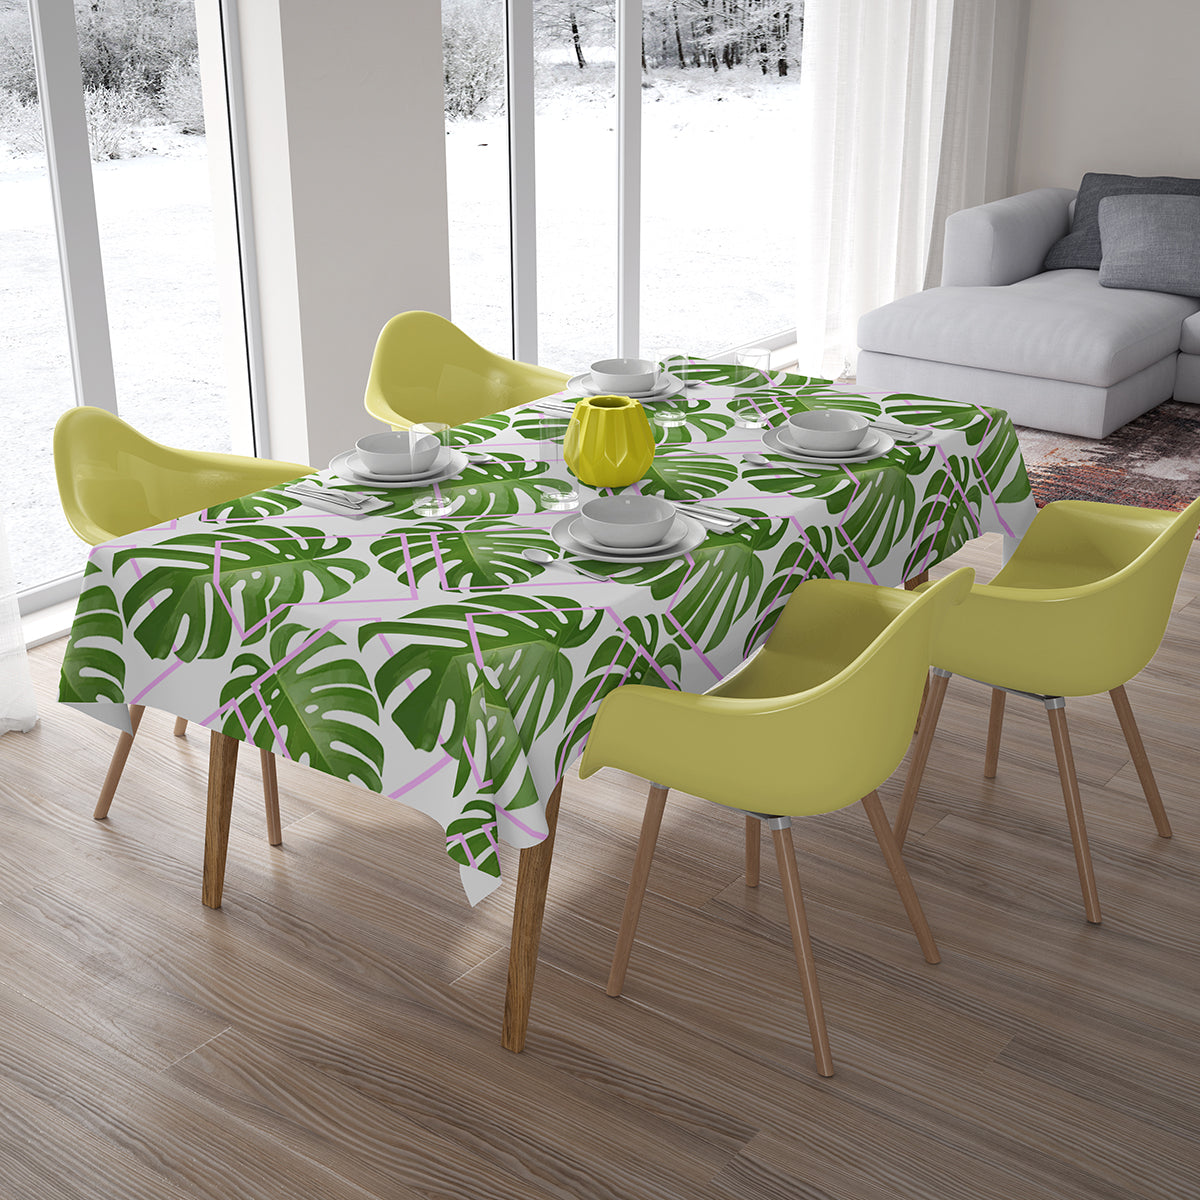 Tablecloth Tropical Palm Leaves - Wellmira